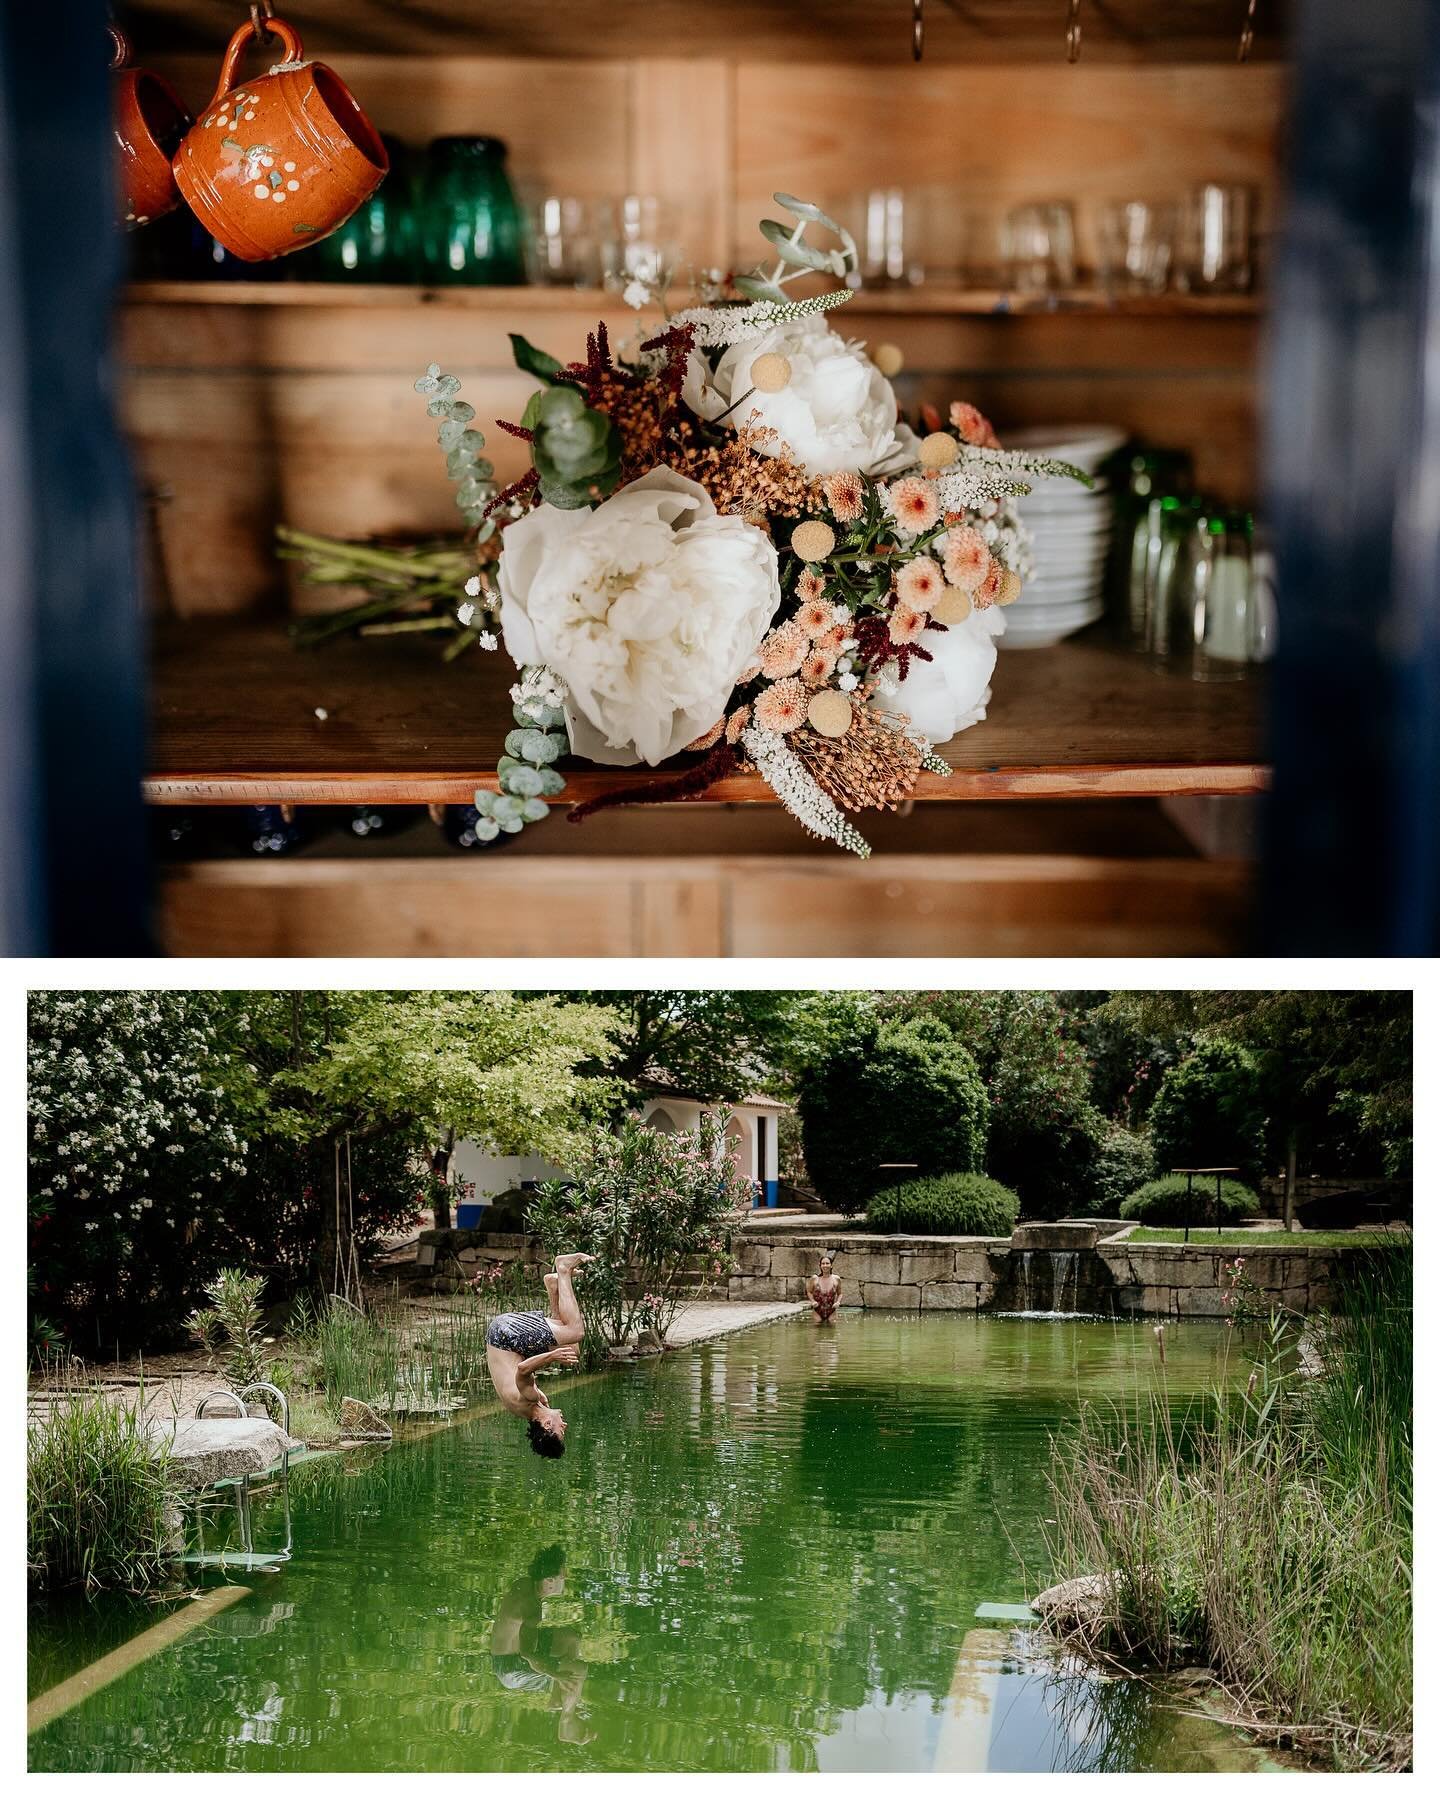 The moments before the wedding can be spent in two ways! The stressed way or the easy way... We always prefer the second!

↟In&ecirc;s &amp; Vitor↟
branquinhophotographers ↯↯ aimfordifferent

Venue @montedoramalho 
DJ @your_jukebox 

#alternativewedd